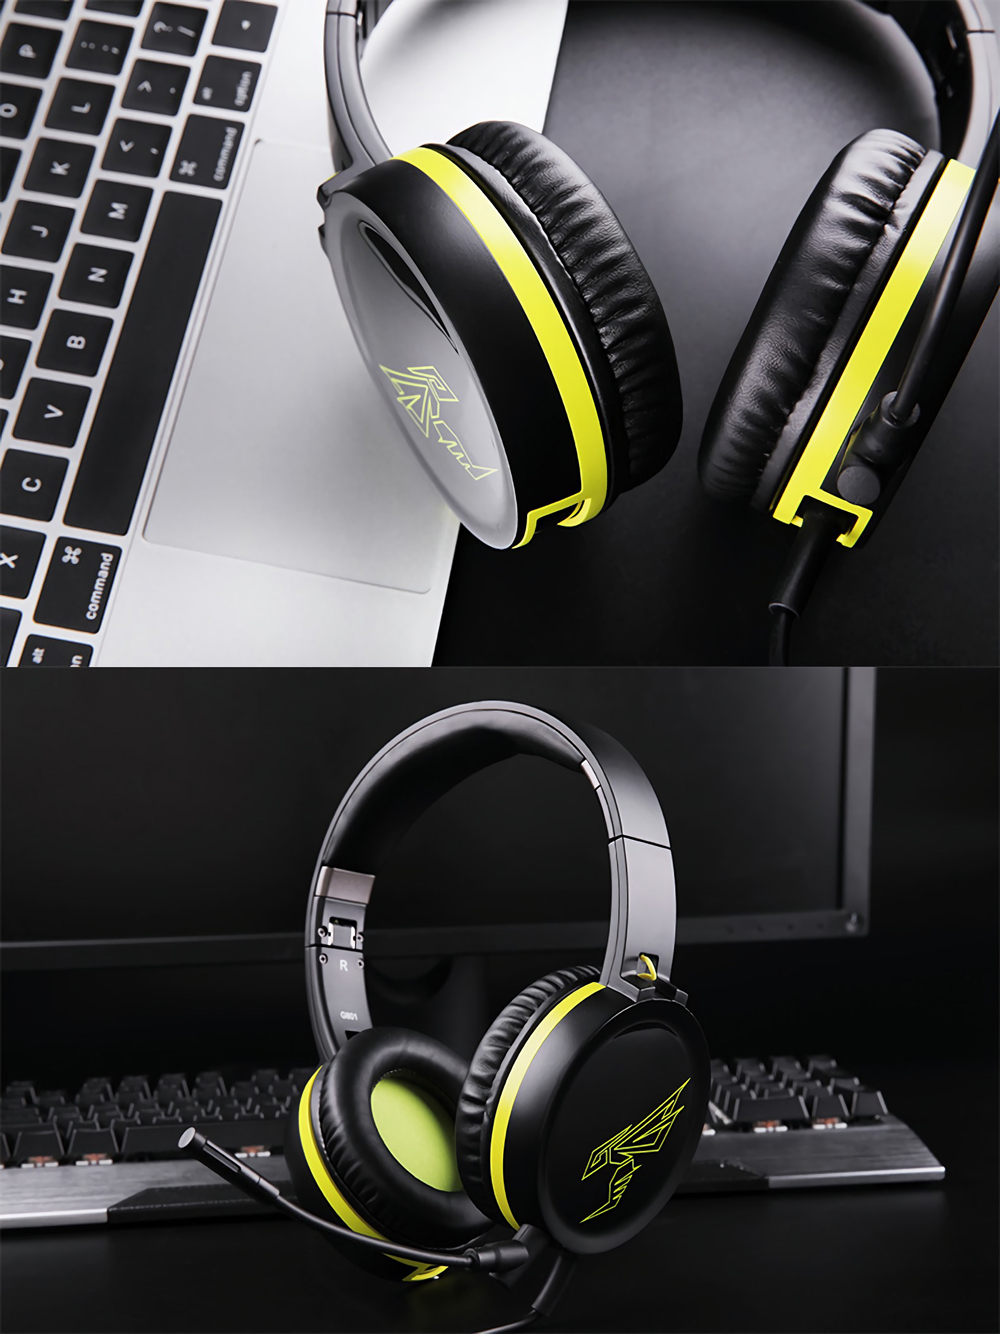 SOMiC G801 Portable Foldable 3.5mm Auido Gaming Headset Headphone with Removable Microphone 16